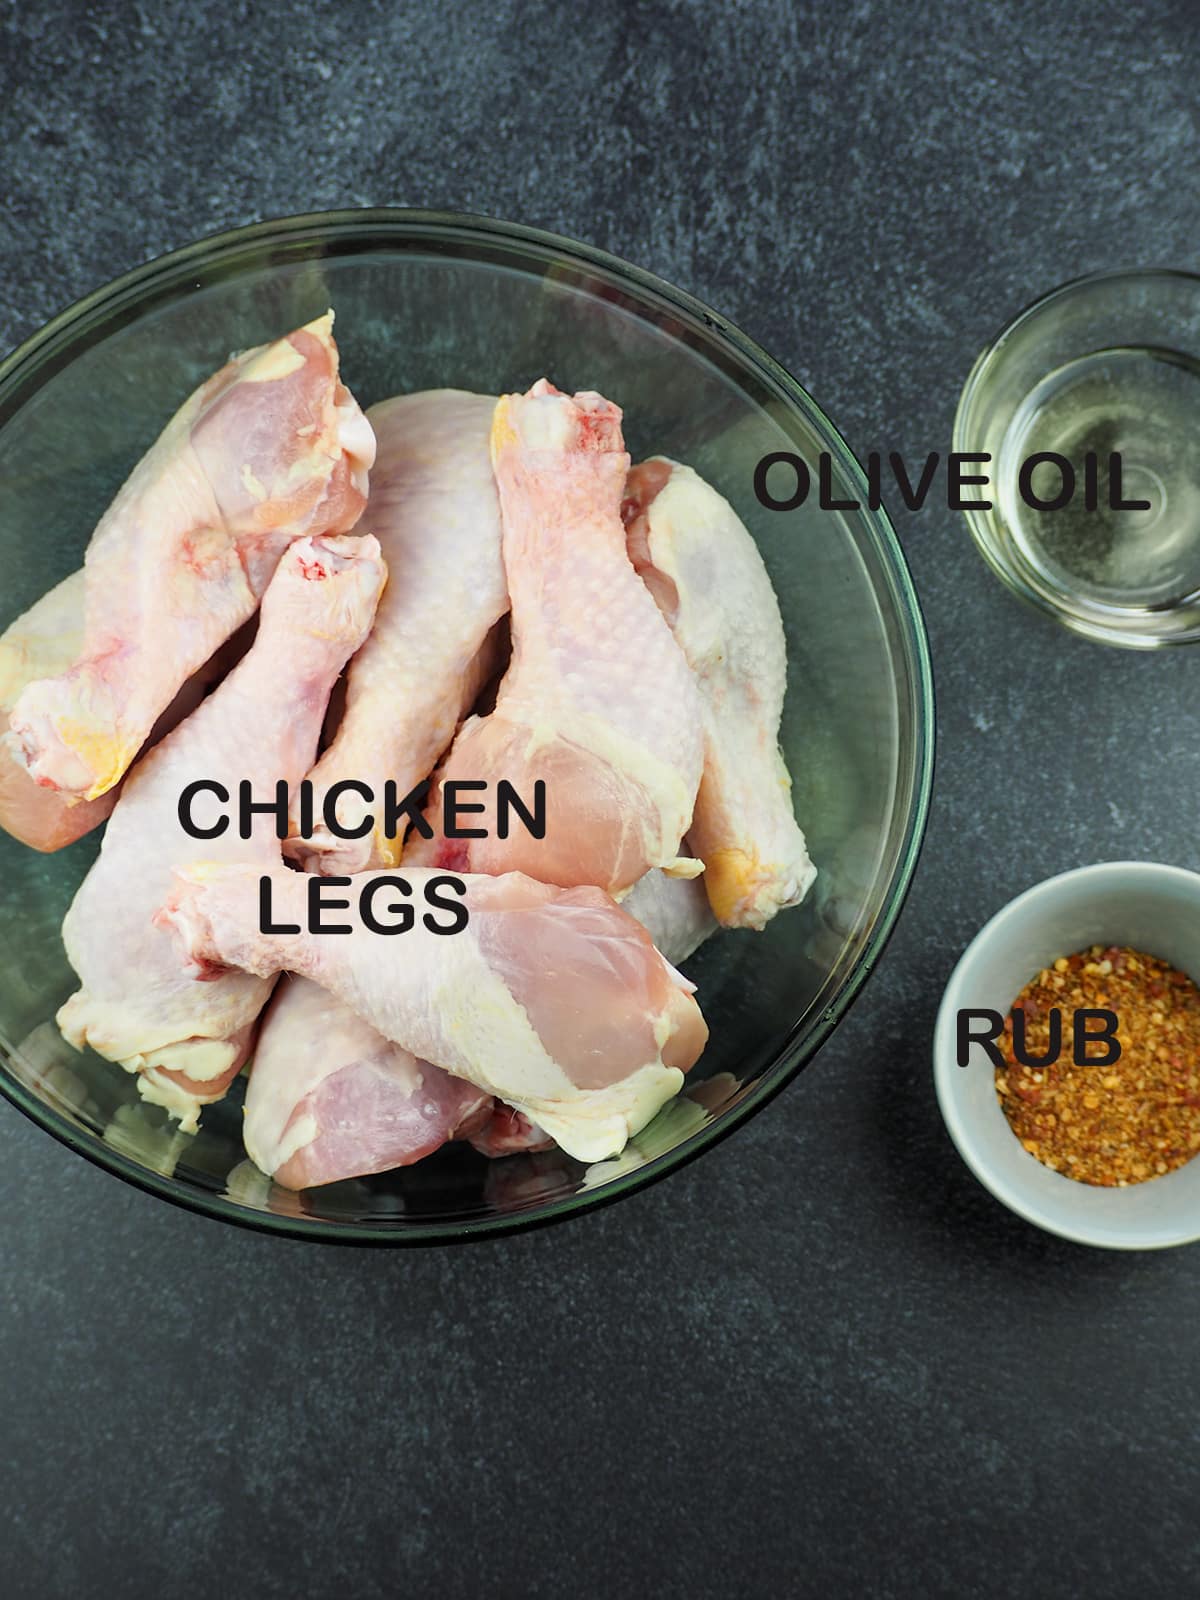 Ingredients for grilled chicken legs.